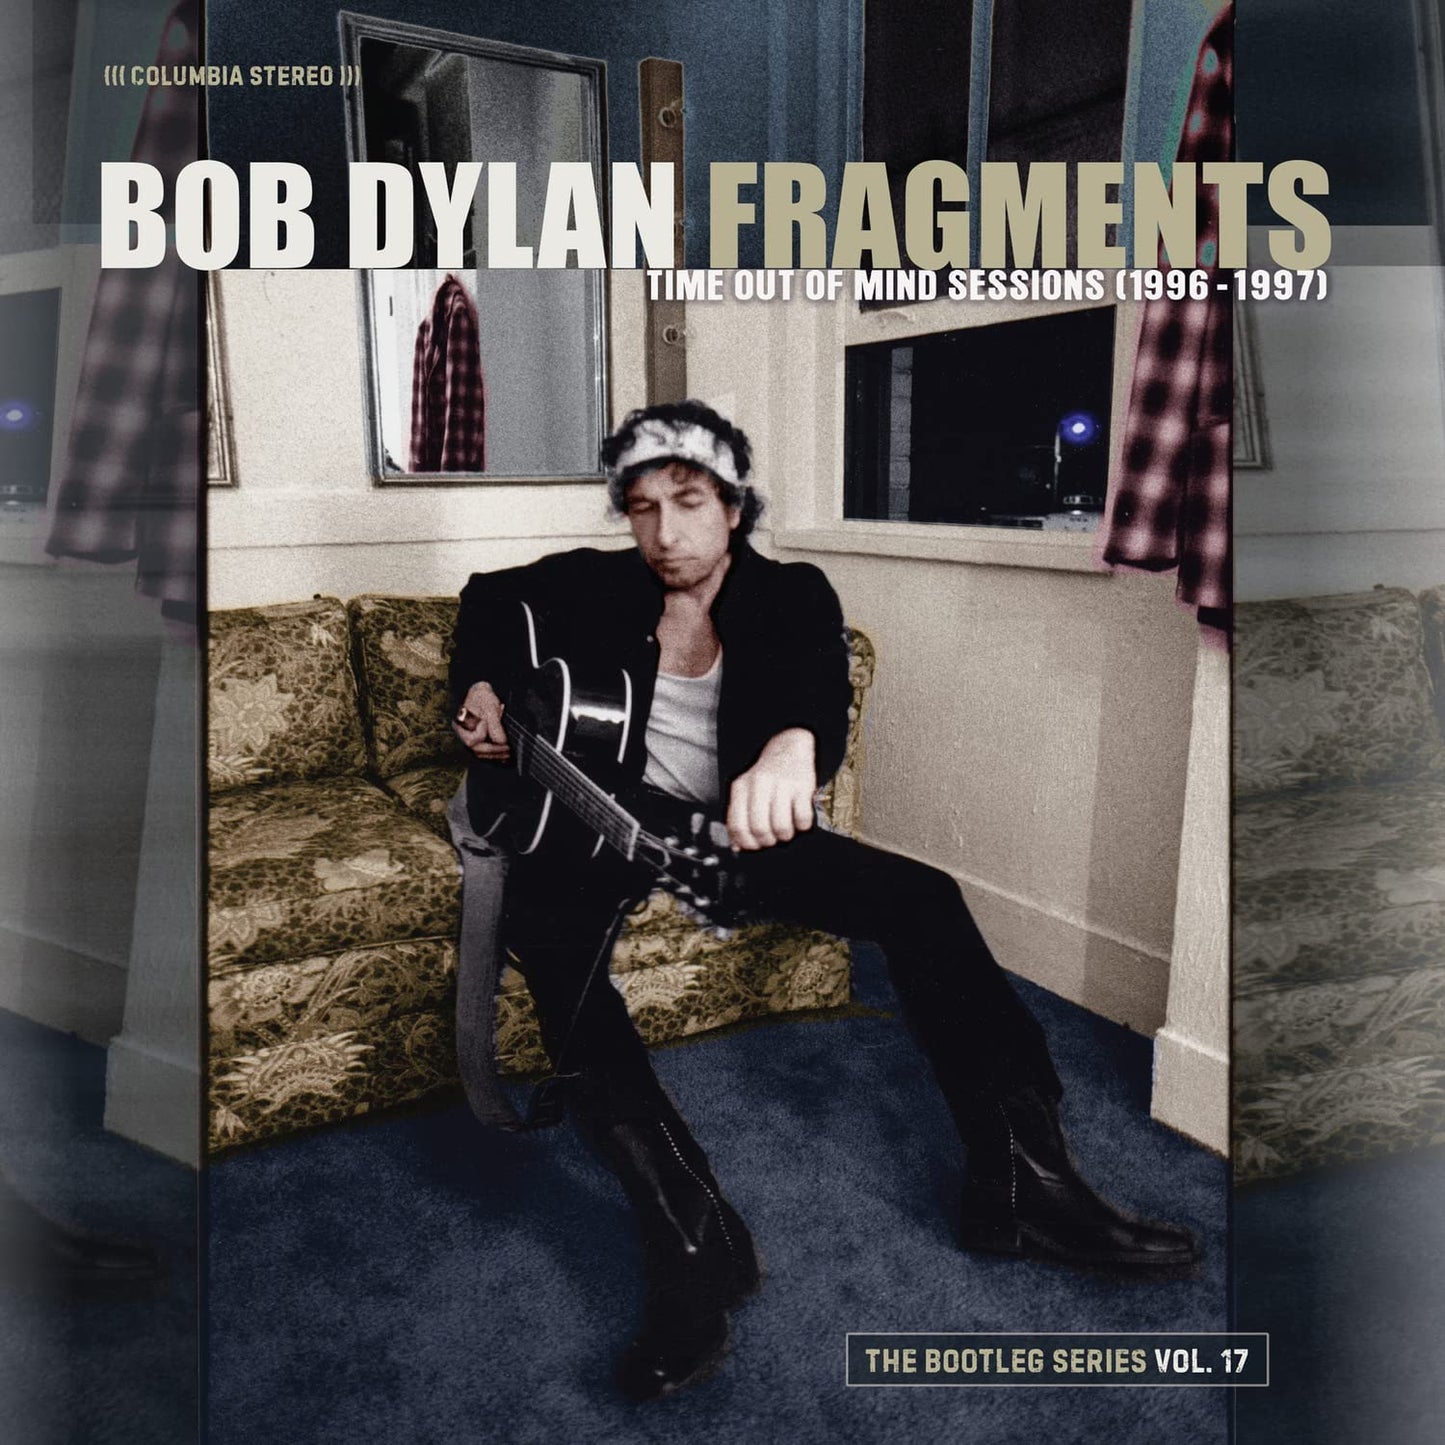 Bob Dylan - Fragments - Time Out Of Mind Sessions (1996-1997): The Bootleg Series Vol. 17 - 5CD